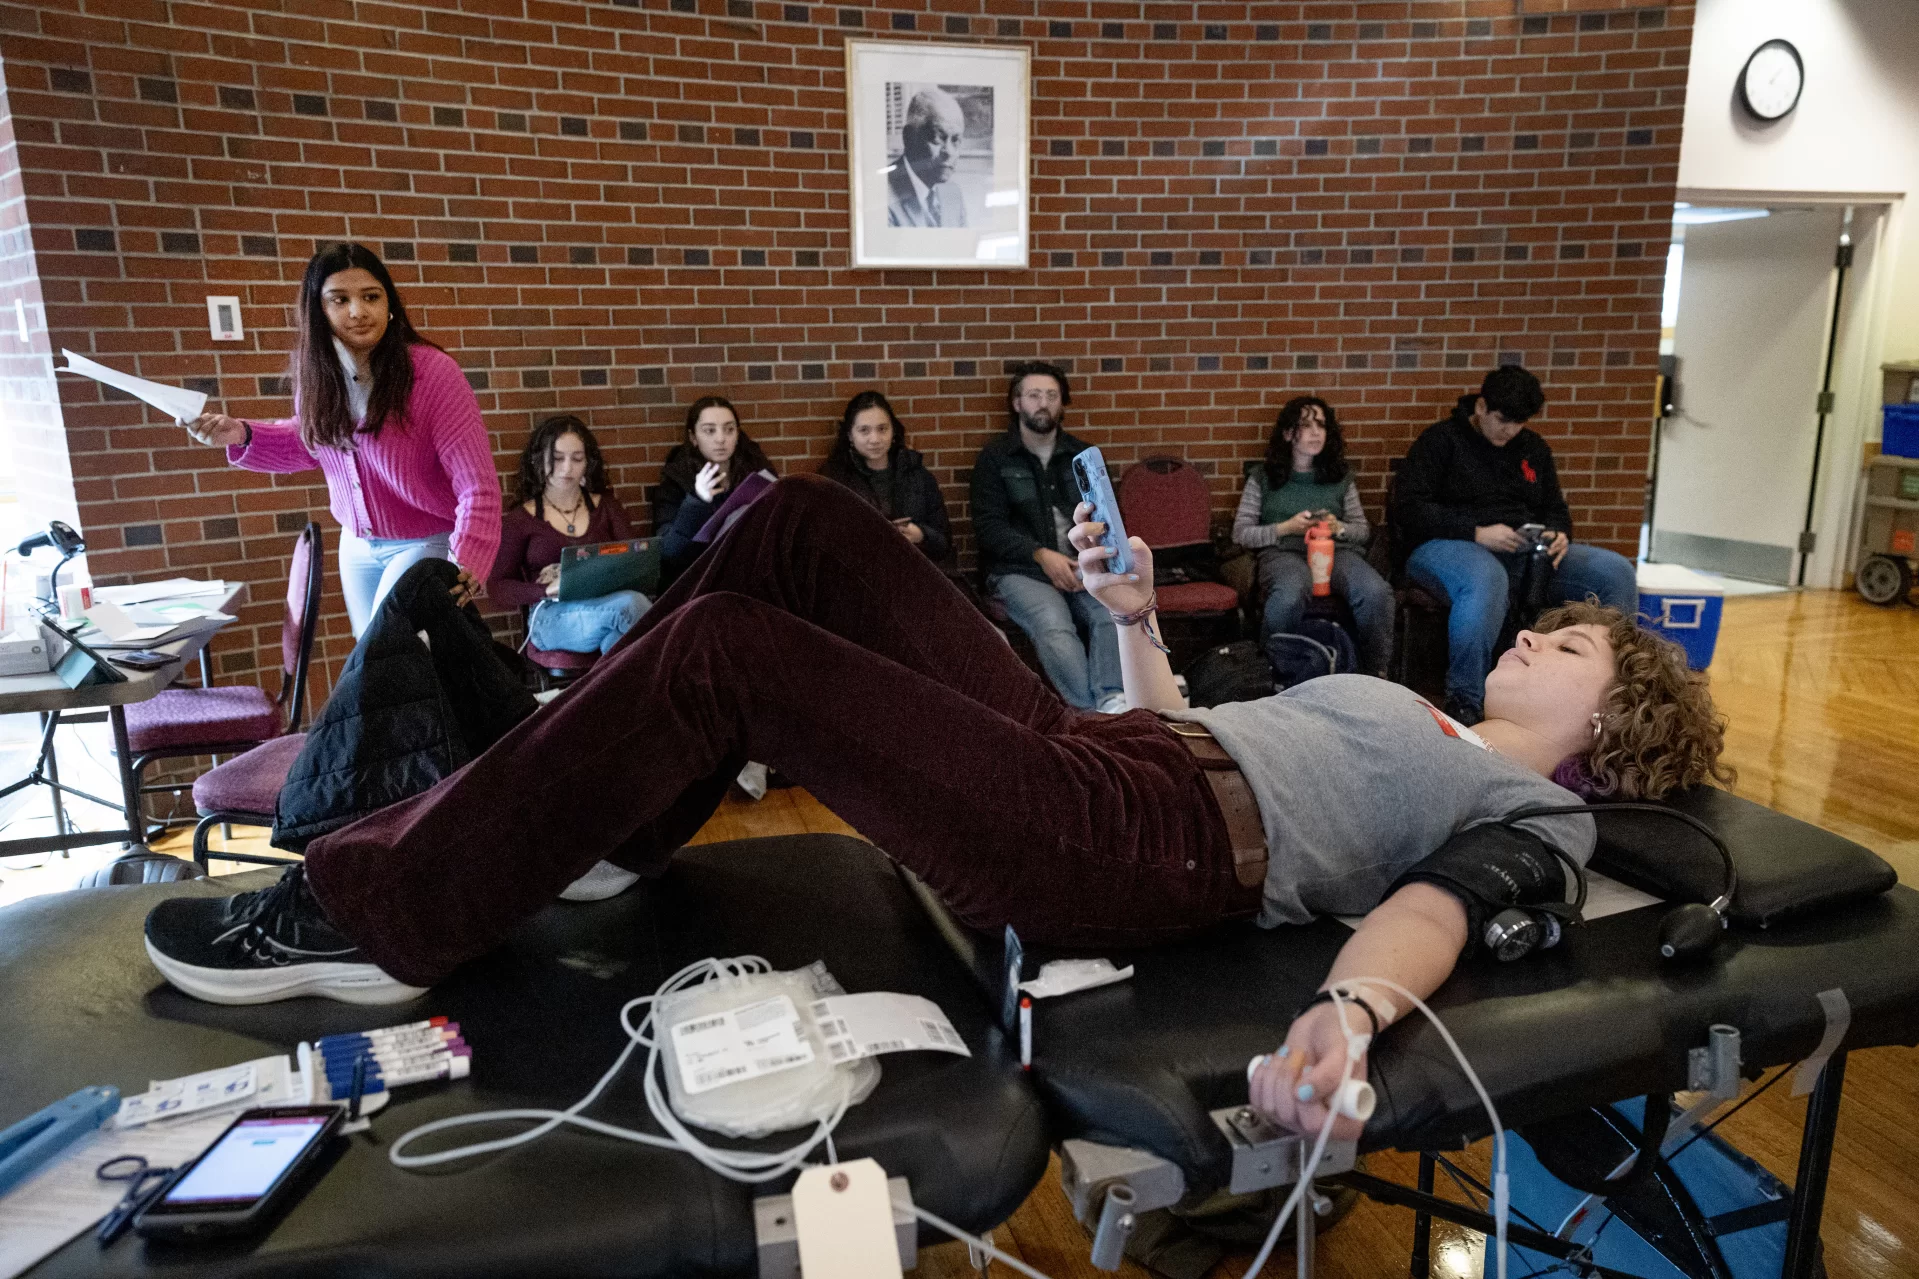 “After the mass tragedy in October, I wanted to help out by donating blood, but every donation spot to donate blood was filled for weeks. I contacted the American Red Cross to see if Bates could help out in any way, and here we are with our first blood drive on campus in four years. This is the start of many more drives!”

— Sivani Arvapalli ’26 (in pink sweater) of South Windsor, Conn., explaining why she collaborated with the Northern New England Region of the American Red Cross to hold today’s blood drive in the Benjamin Mays Center, the first collection on the Bates campus since 2019. Moving forward, the college and American Red Cross are planning to host four drives per year.

The American Red Cross is experiencing an emergency blood shortage as the nation faces the lowest number of people giving blood in 20 years. The Red Cross blood supply has fallen to critically low levels across the country, and blood and platelet donors are urged to make a donation appointment to help alleviate the shortage and help ensure lifesaving medical procedures are not put on hold. Snow, ice, and extreme temperatures have contributed to the shortage by making it harder to move blood products across the Red Cross network.

“It’s worth a couple of hours of your day to do this!” said Jamie Shelton ‘27 of Zurich, Switzerland.

Mya Laliberte ’25 of Rangeley, Maine, in patterned sweater. They’re to help her friend Sivan’s efforts. She donated right after Oct. 25, 2024 and wanted to do it again.

Jamie Shelton ’27 is in gray sweater. “It’s important — and — convenient.”

Aislinn Carty ’24 of Mountville. Pa, with long hair and earrings. “I’ve never done it before. It’s a great opportunity.”